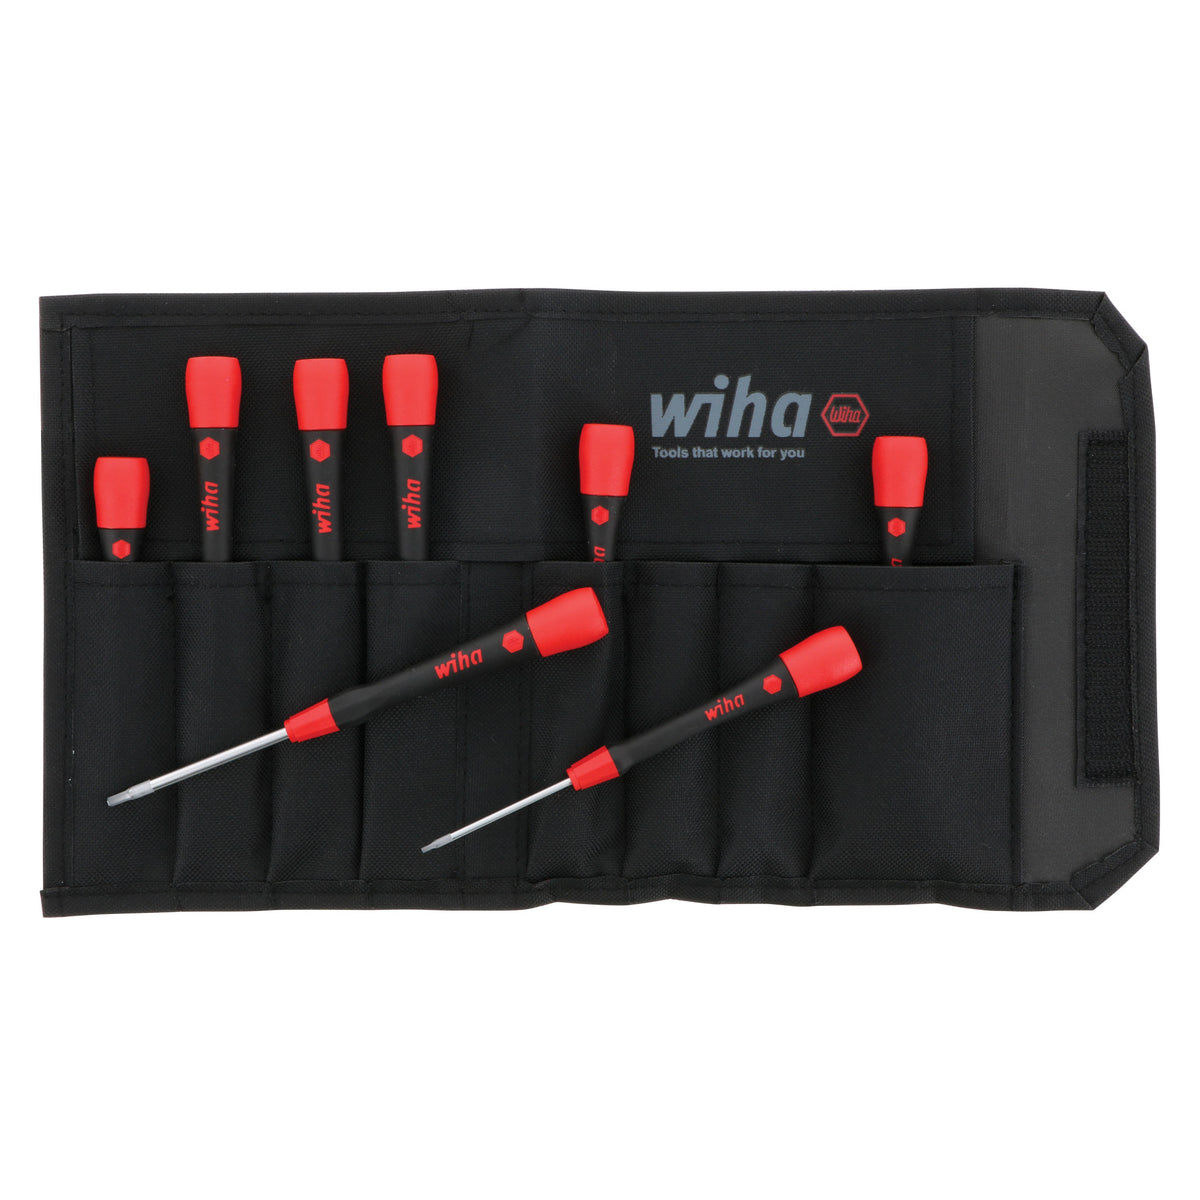 Wiha 26393 PicoFinish Precision Hex Metric 7Pc. Set Made in Germany